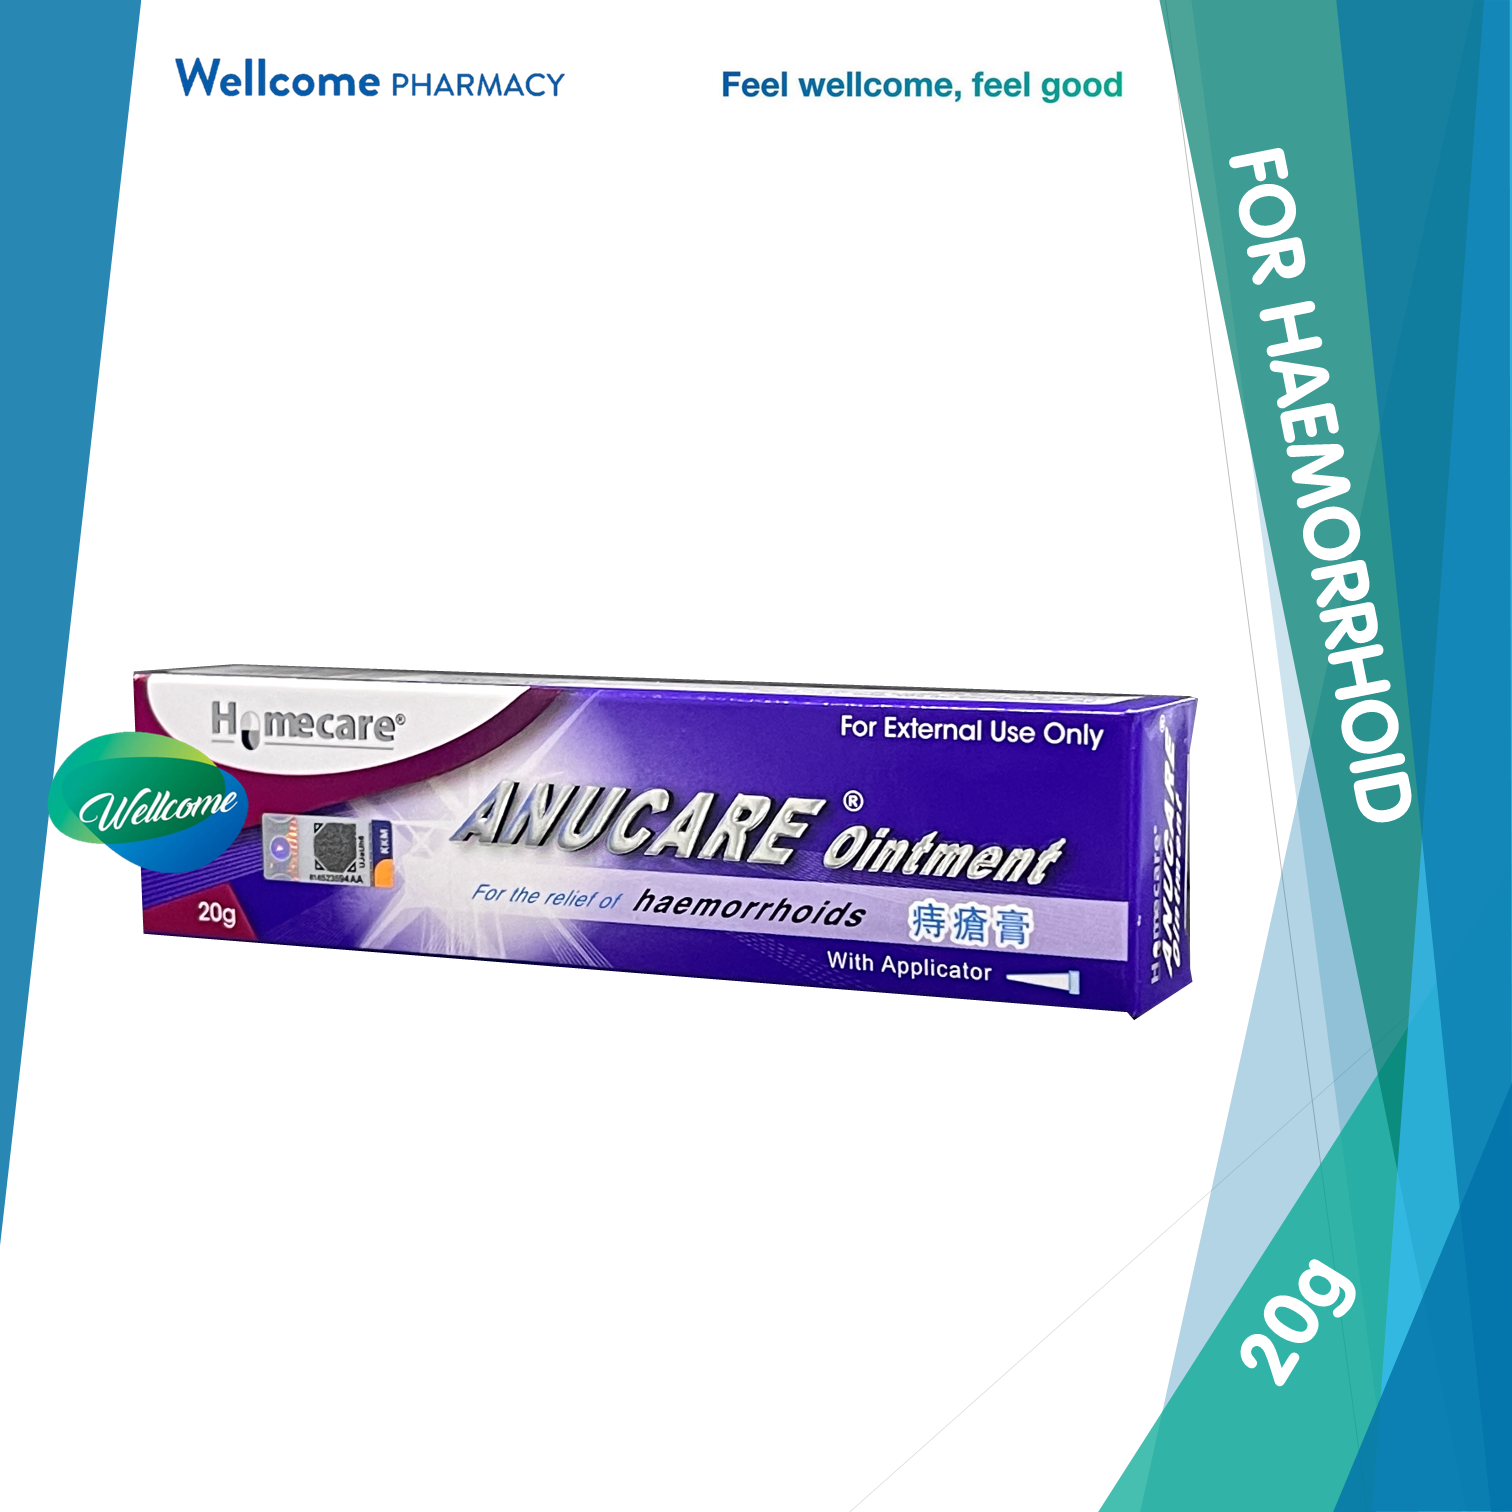 YSP Anucare Ointment - 20g.png